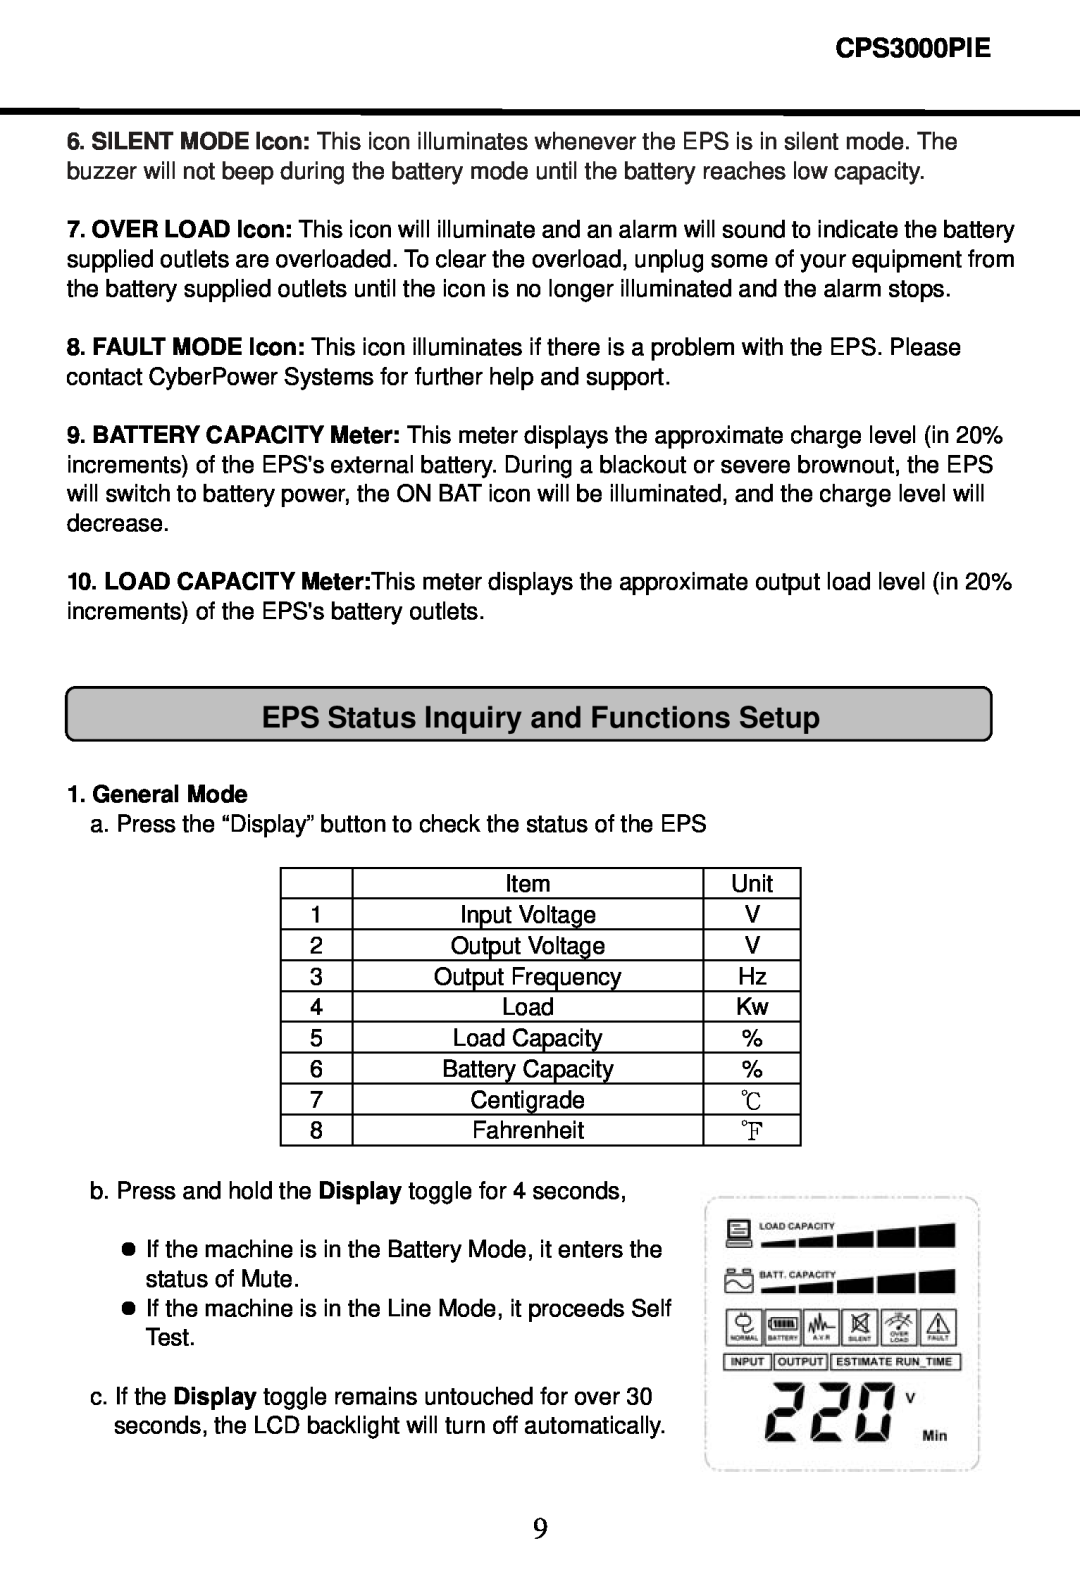 CyberPower Systems CPS3000PIE user manual EPS Status Inquiry and Functions Setup, General Mode 